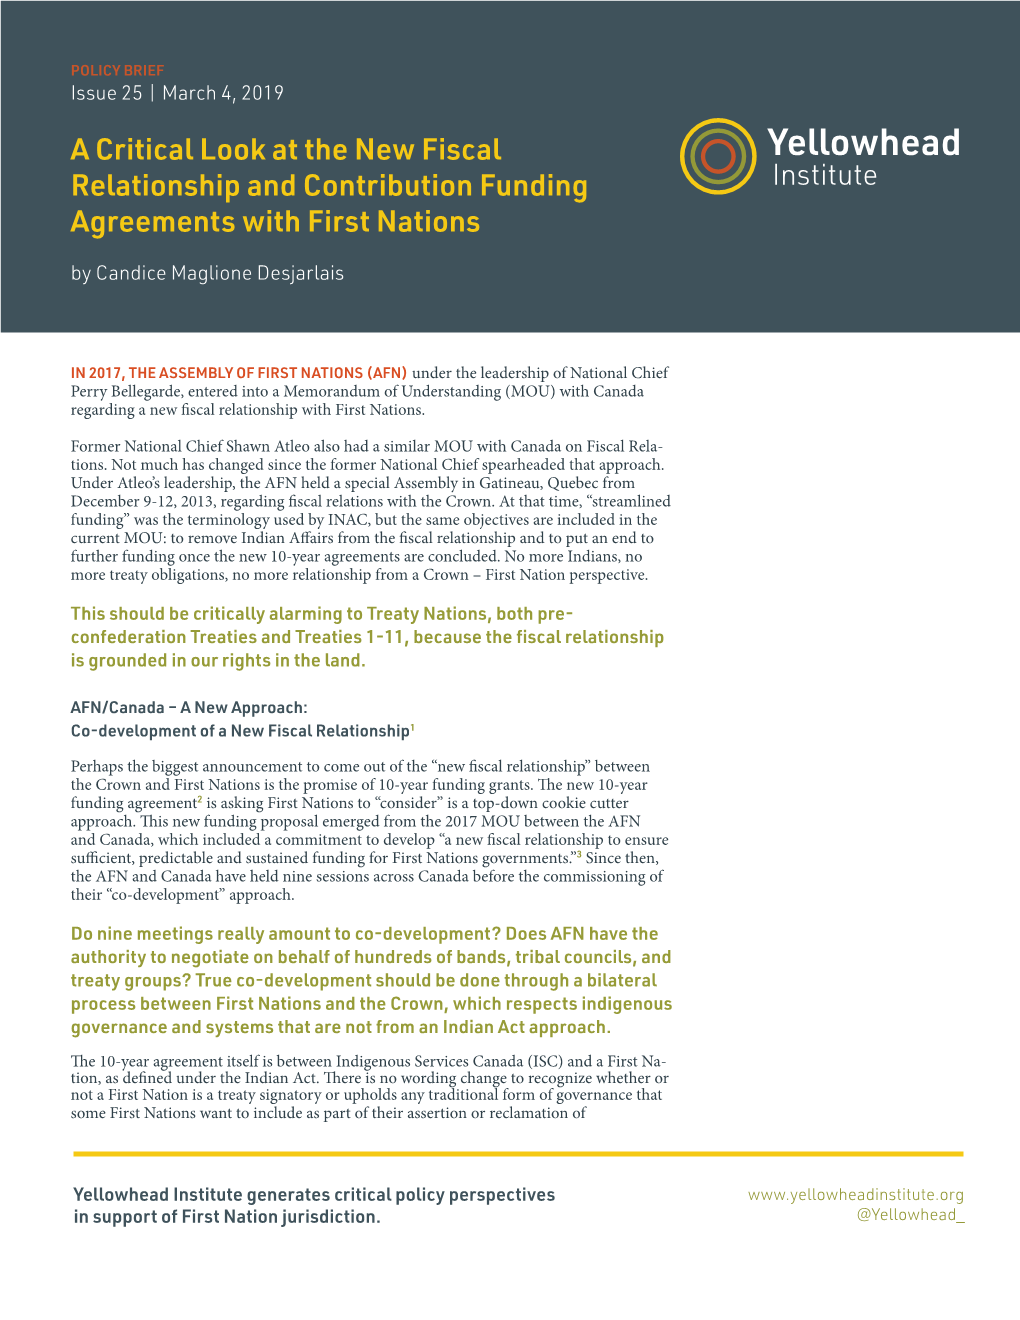 A Critical Look at the New Fiscal Relationship and Contribution Funding Agreements with First Nations by Candice Maglione Desjarlais